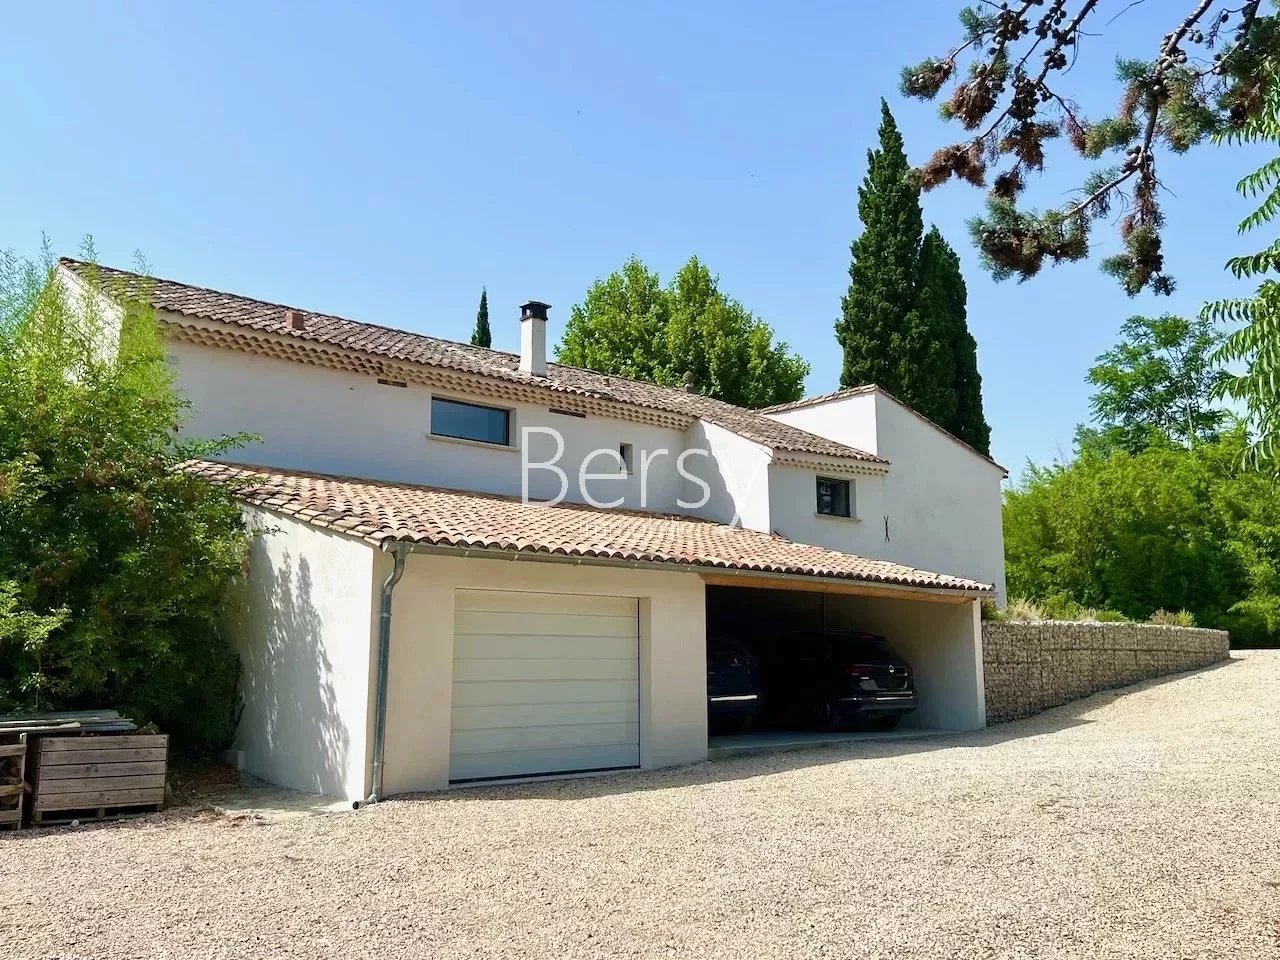 OPPORTUNITY - FULLY RENOVATED MAS - approximately 280m2 - 5 bedrooms - 9700m2 of land - Heated swimming pool of 5x10m